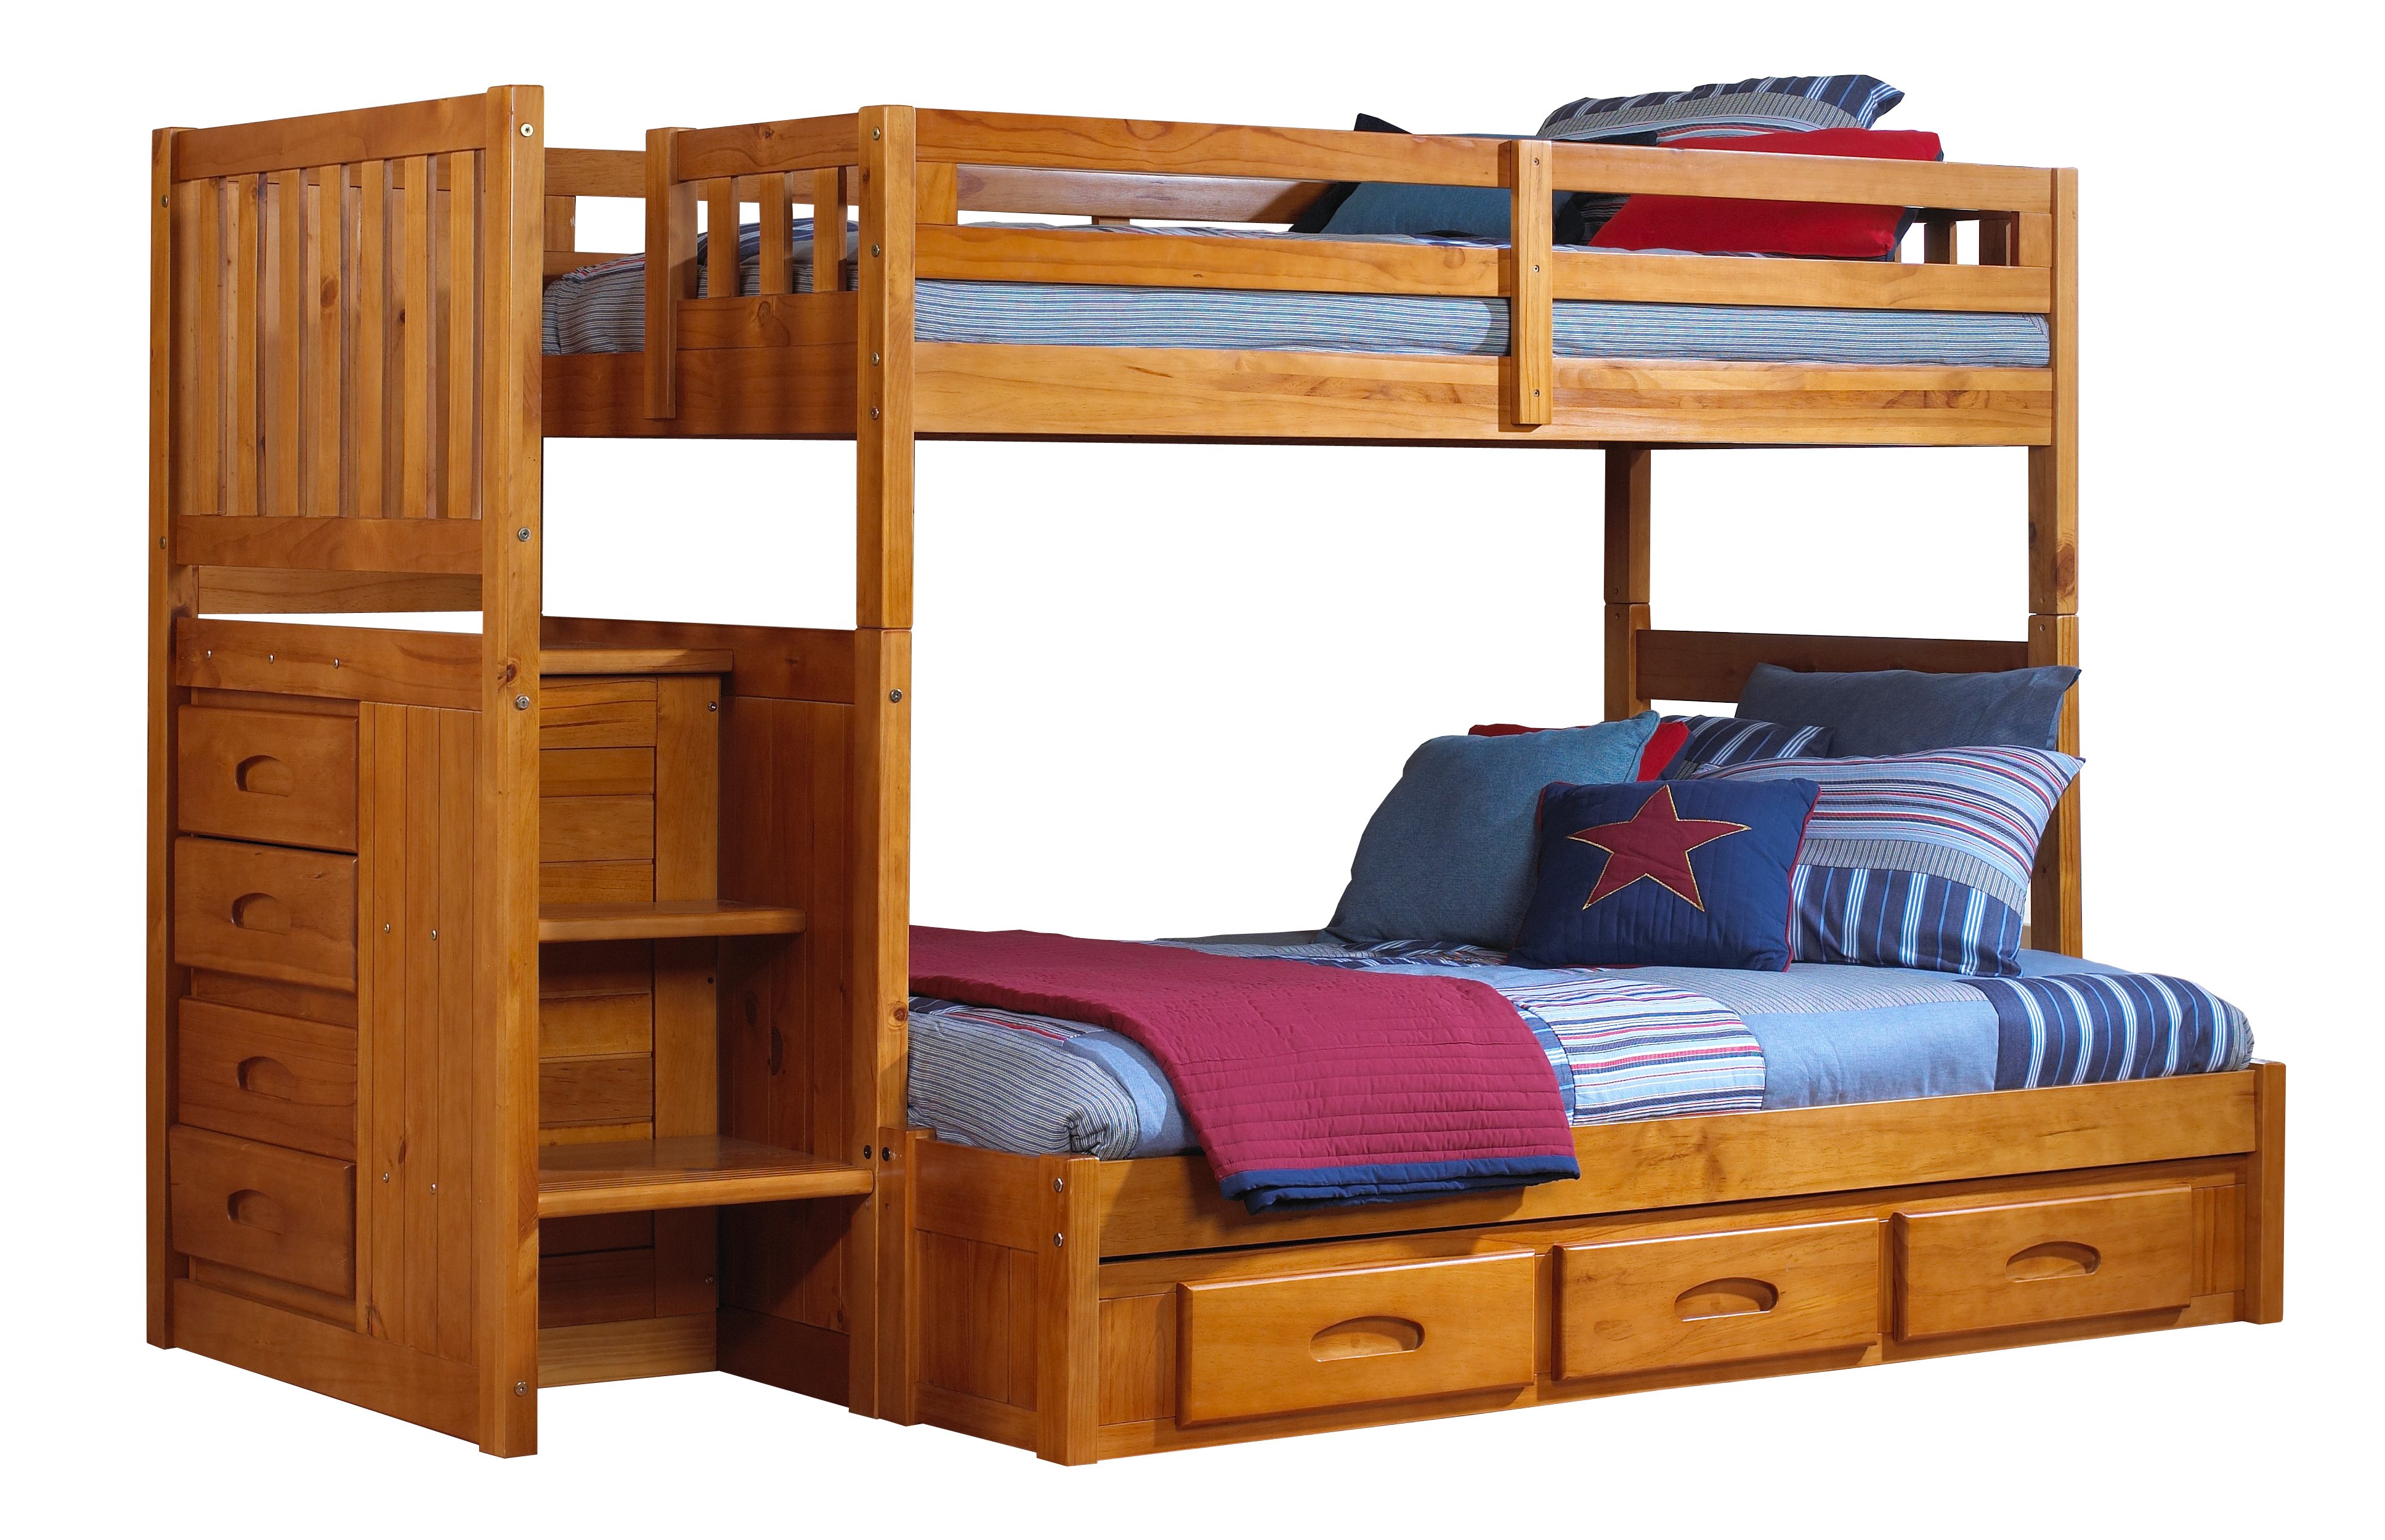 Honey Staircase Bunk Bed, Acadia Merlot Twin Over Full Bunk Bed